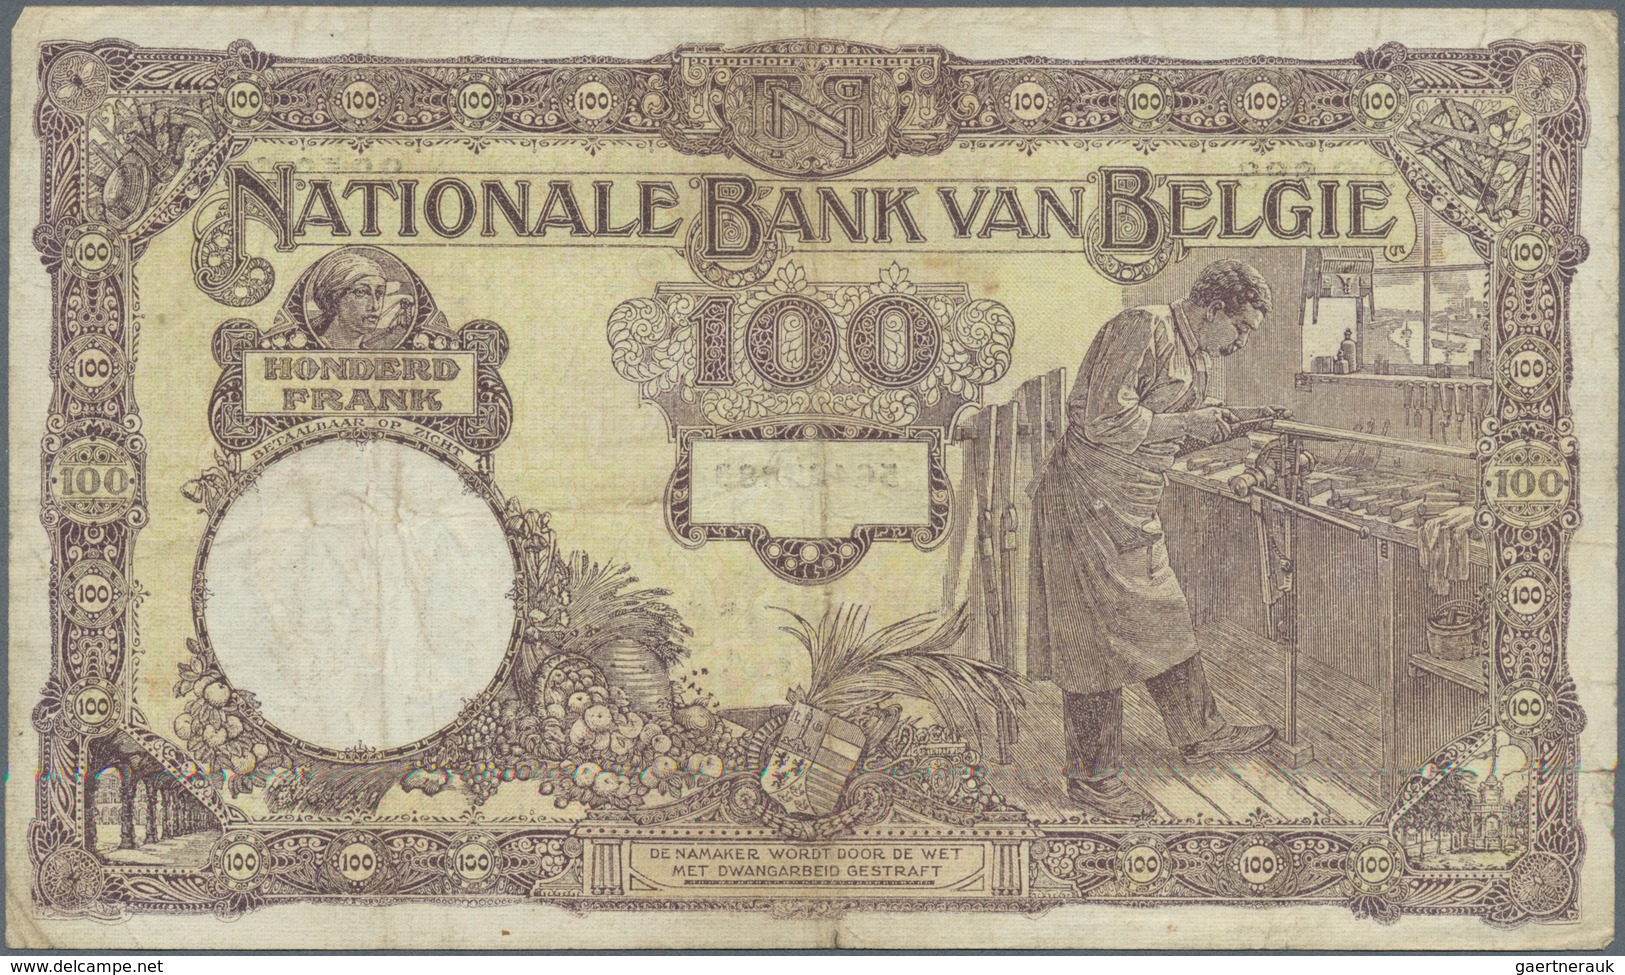 Belgium / Belgien: set with 4 Banknotes 100 Francs 1924 and 1927, P.95 in almost well worn condition